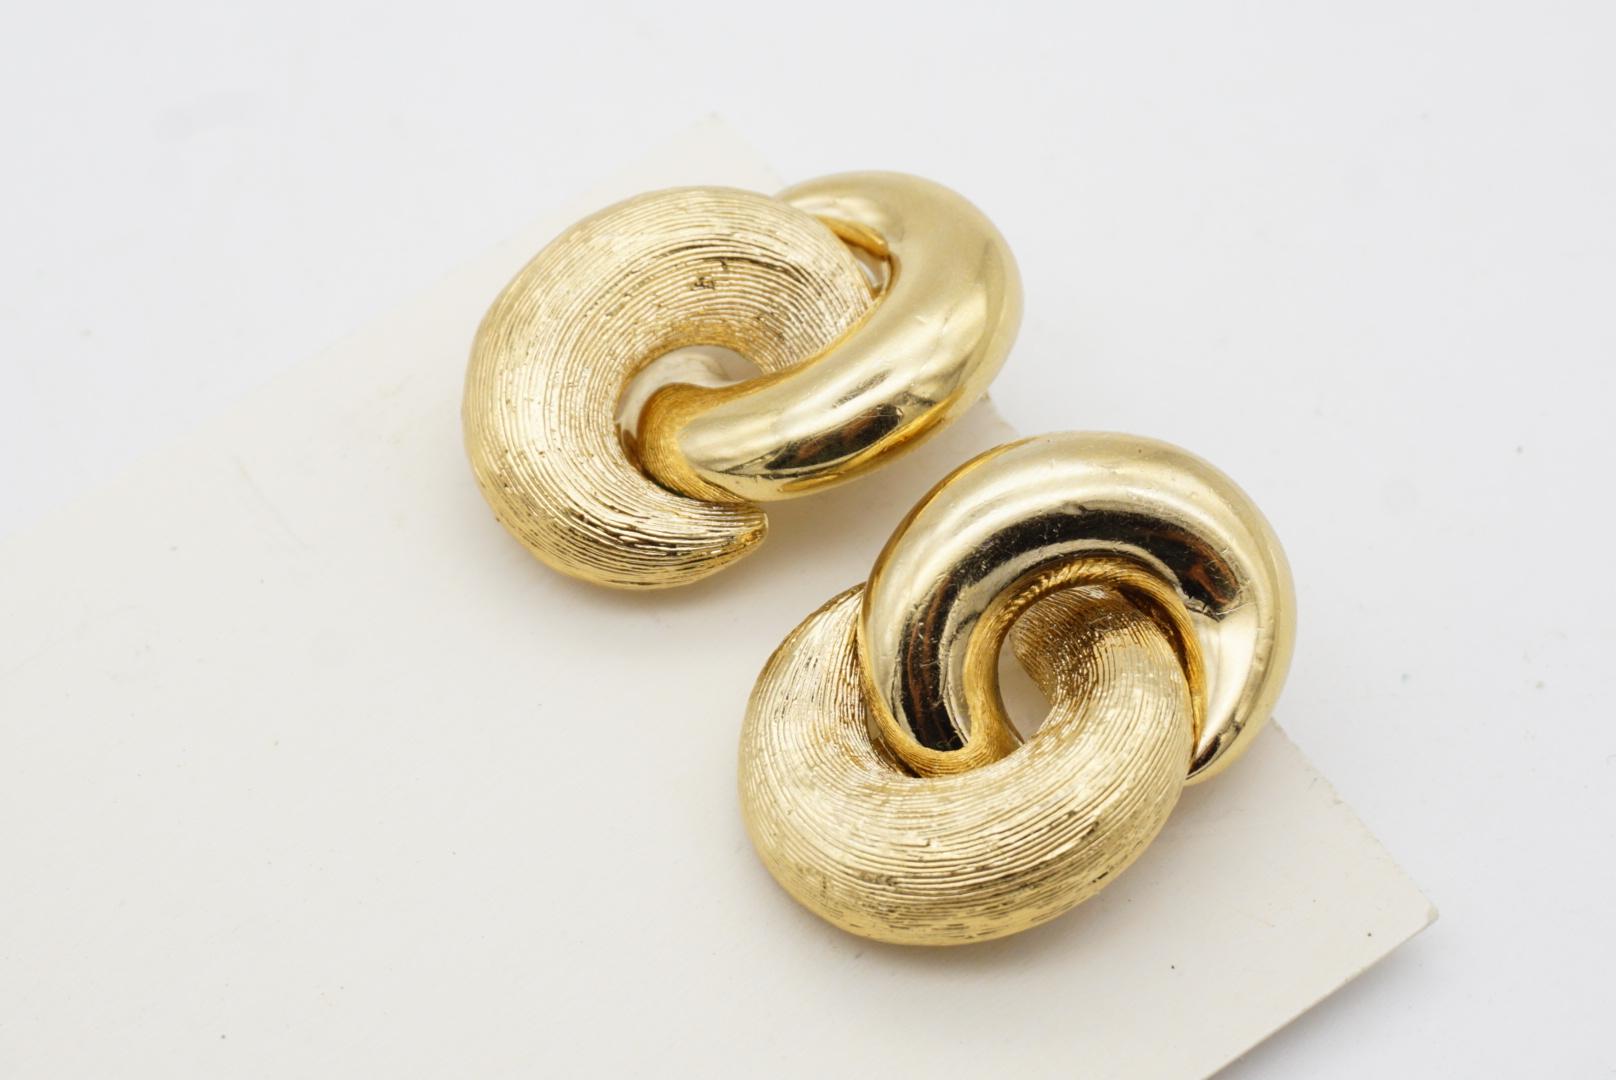 Christian Dior Vintage 1980s Large Interlock Knot Matte Glow Gold Clip Earrings For Sale 5